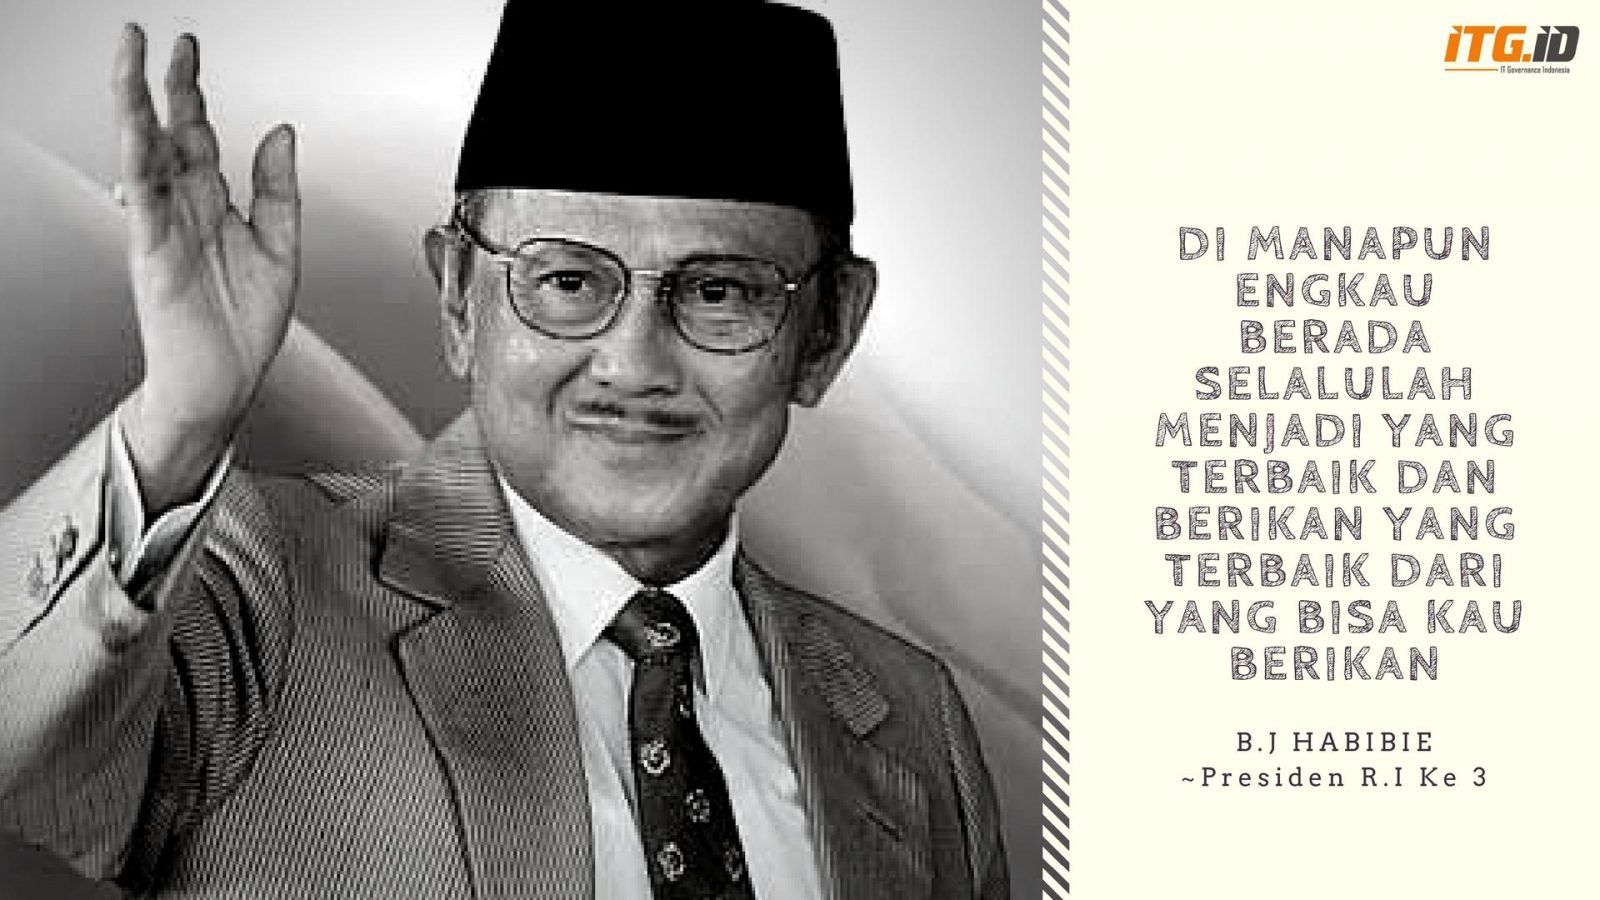 Quotes. IT Governance Indonesia